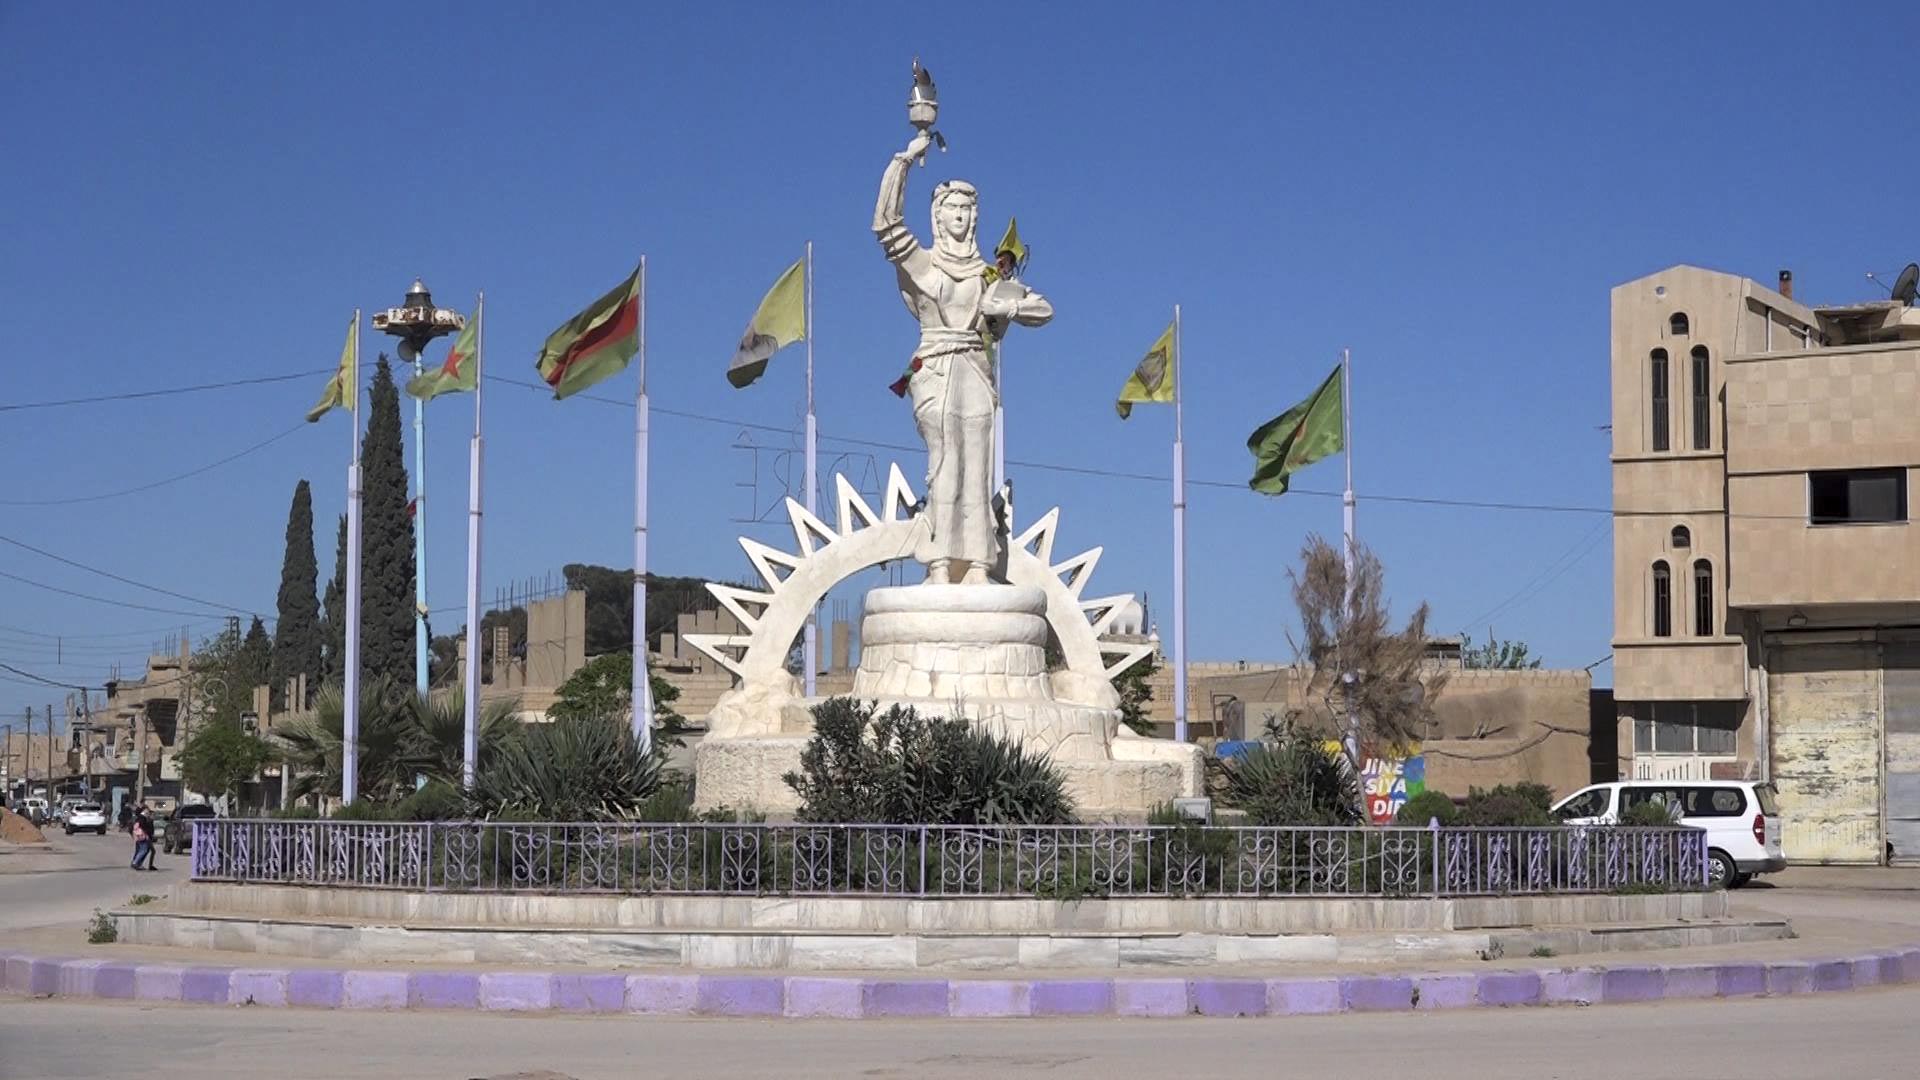 The Statue of the Free Woman at the entrance of Amude, 20 miles west of Qamishli, Syria